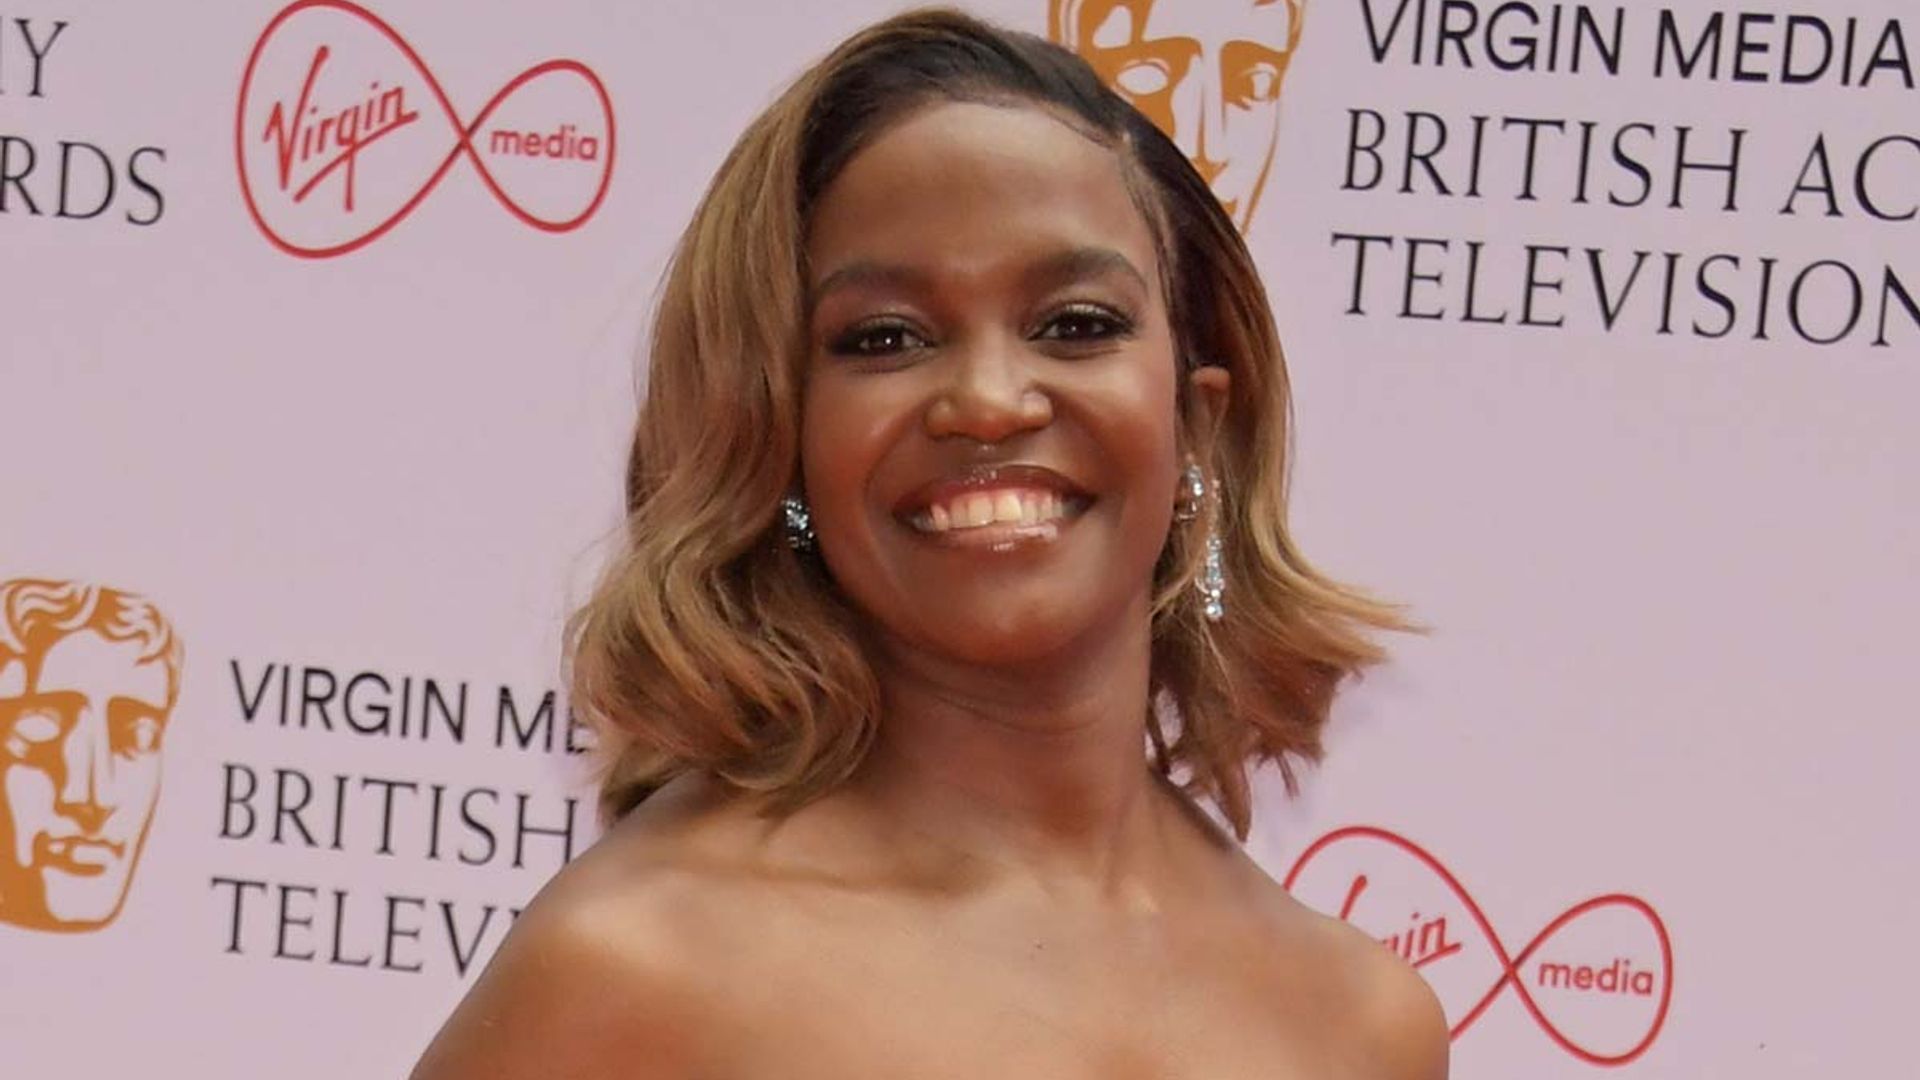 Strictly's Oti Mabuse looks bold and beautiful in latest lingerie photo